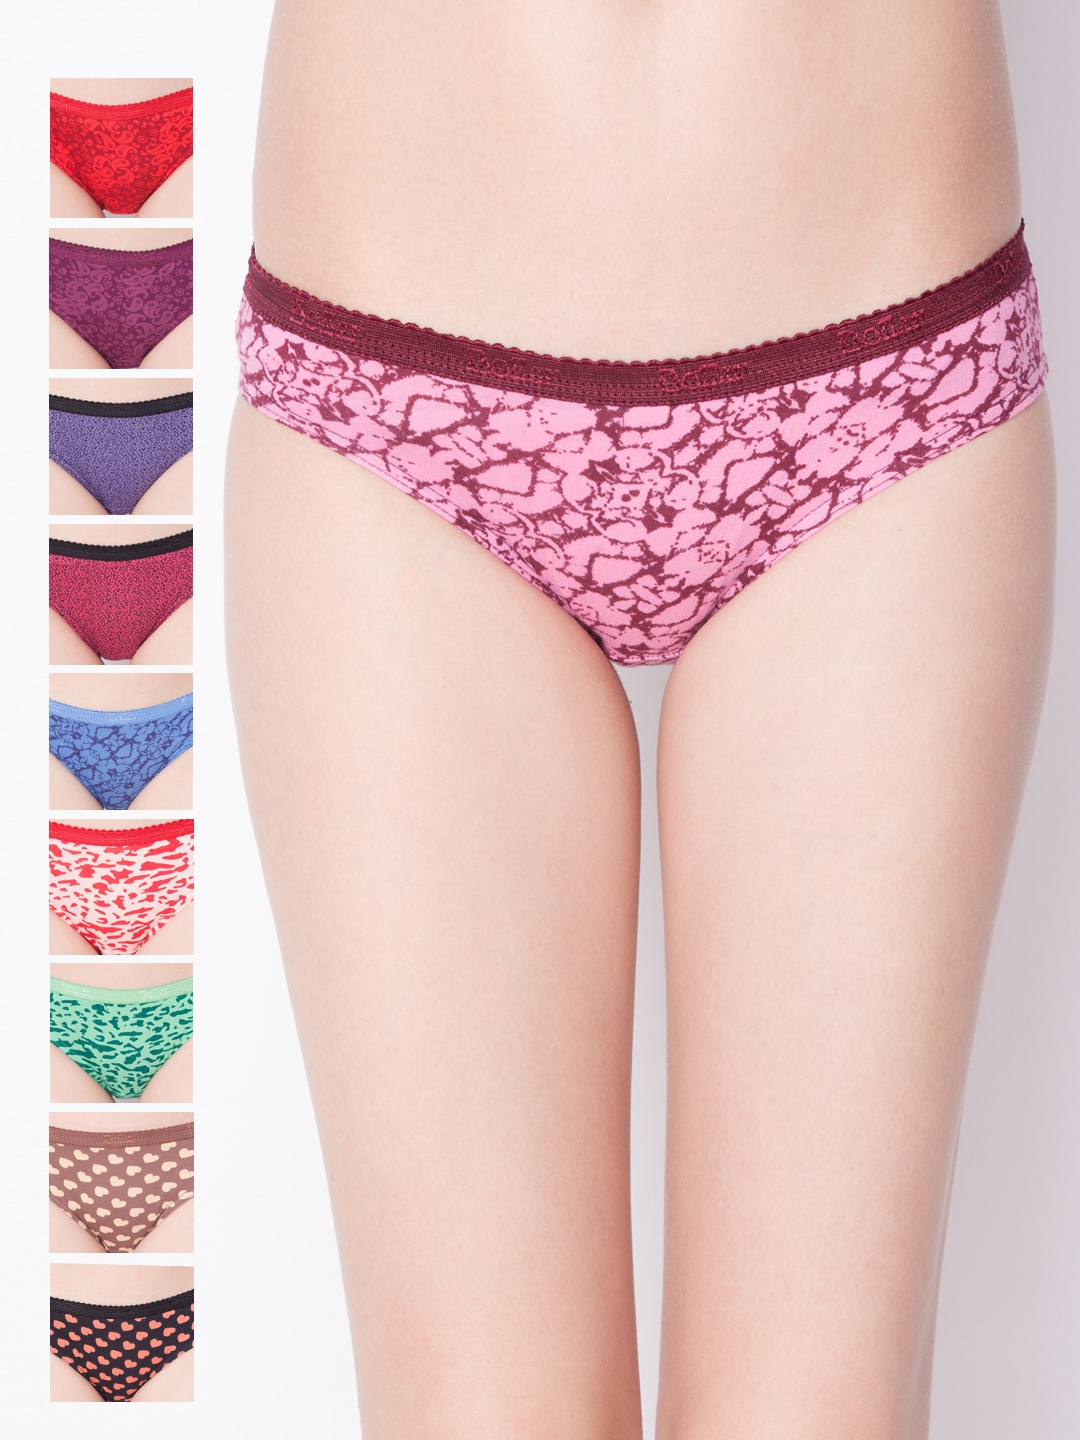 Buy DOLLAR MISSY Women Assorted Deep Color Printed Pack of 4 Outer  Elasticated Cotton Bikini Panties